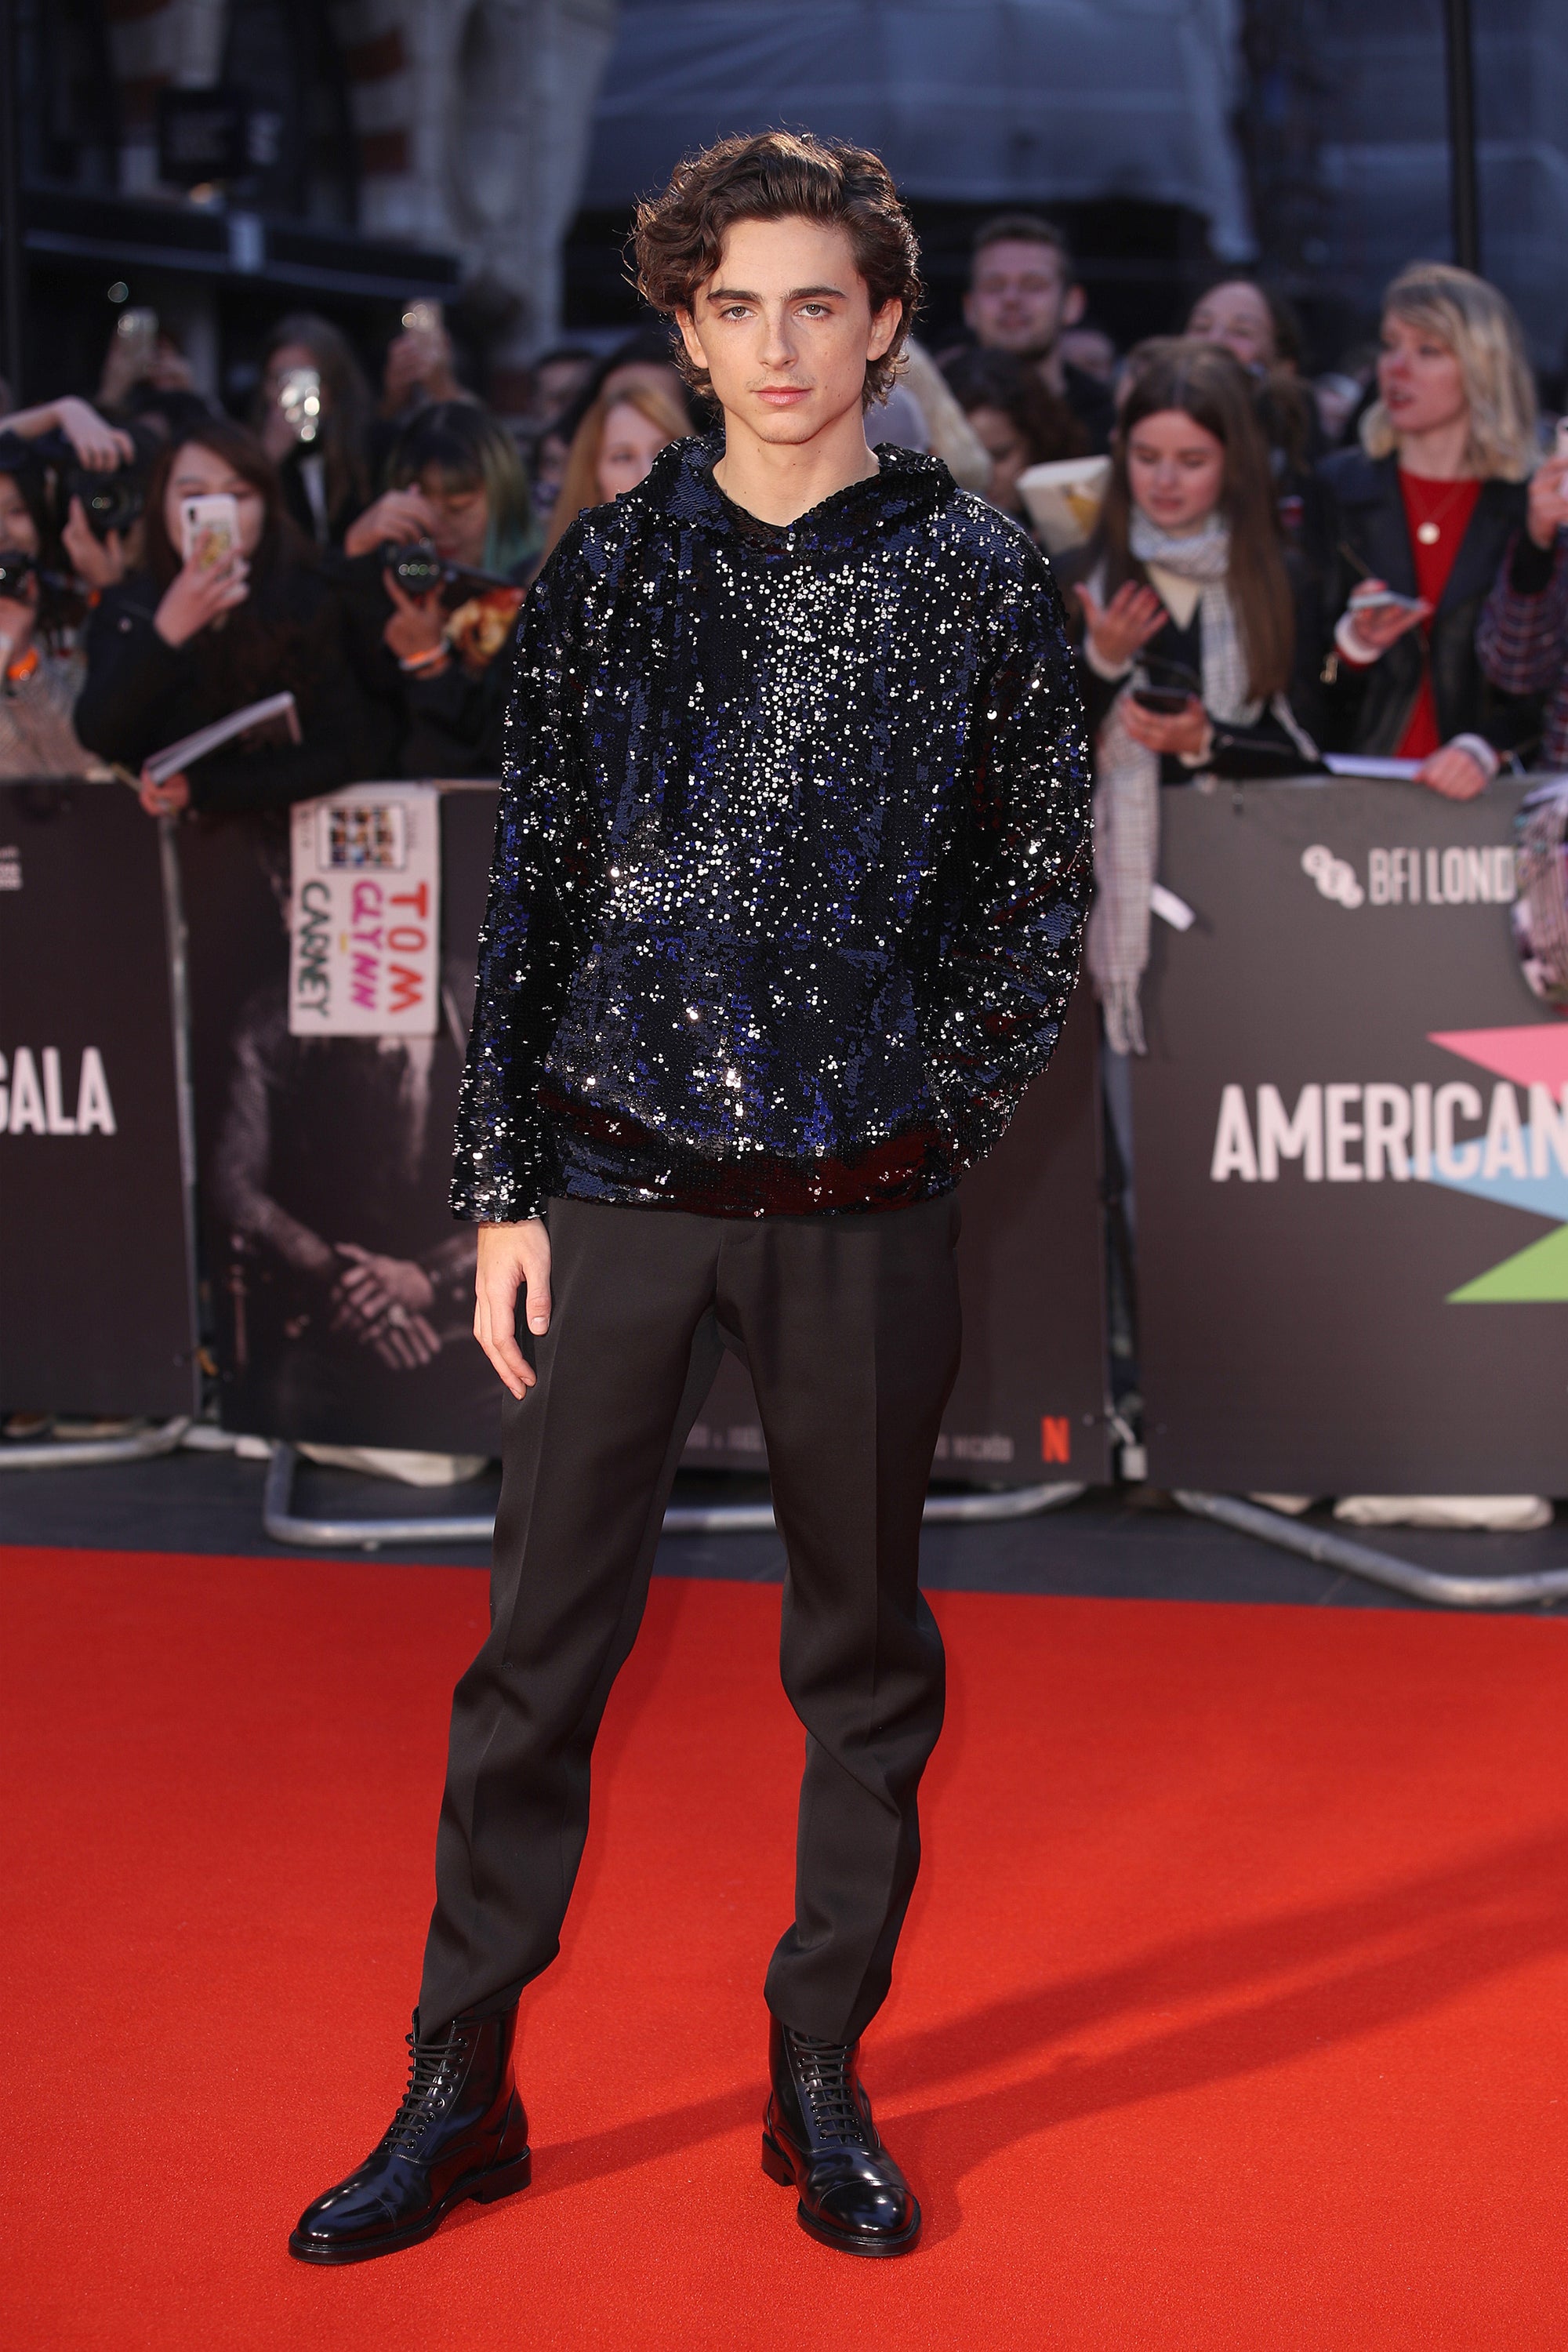 Timothee Chalamet's Best Red Carpet Fashion: Pics